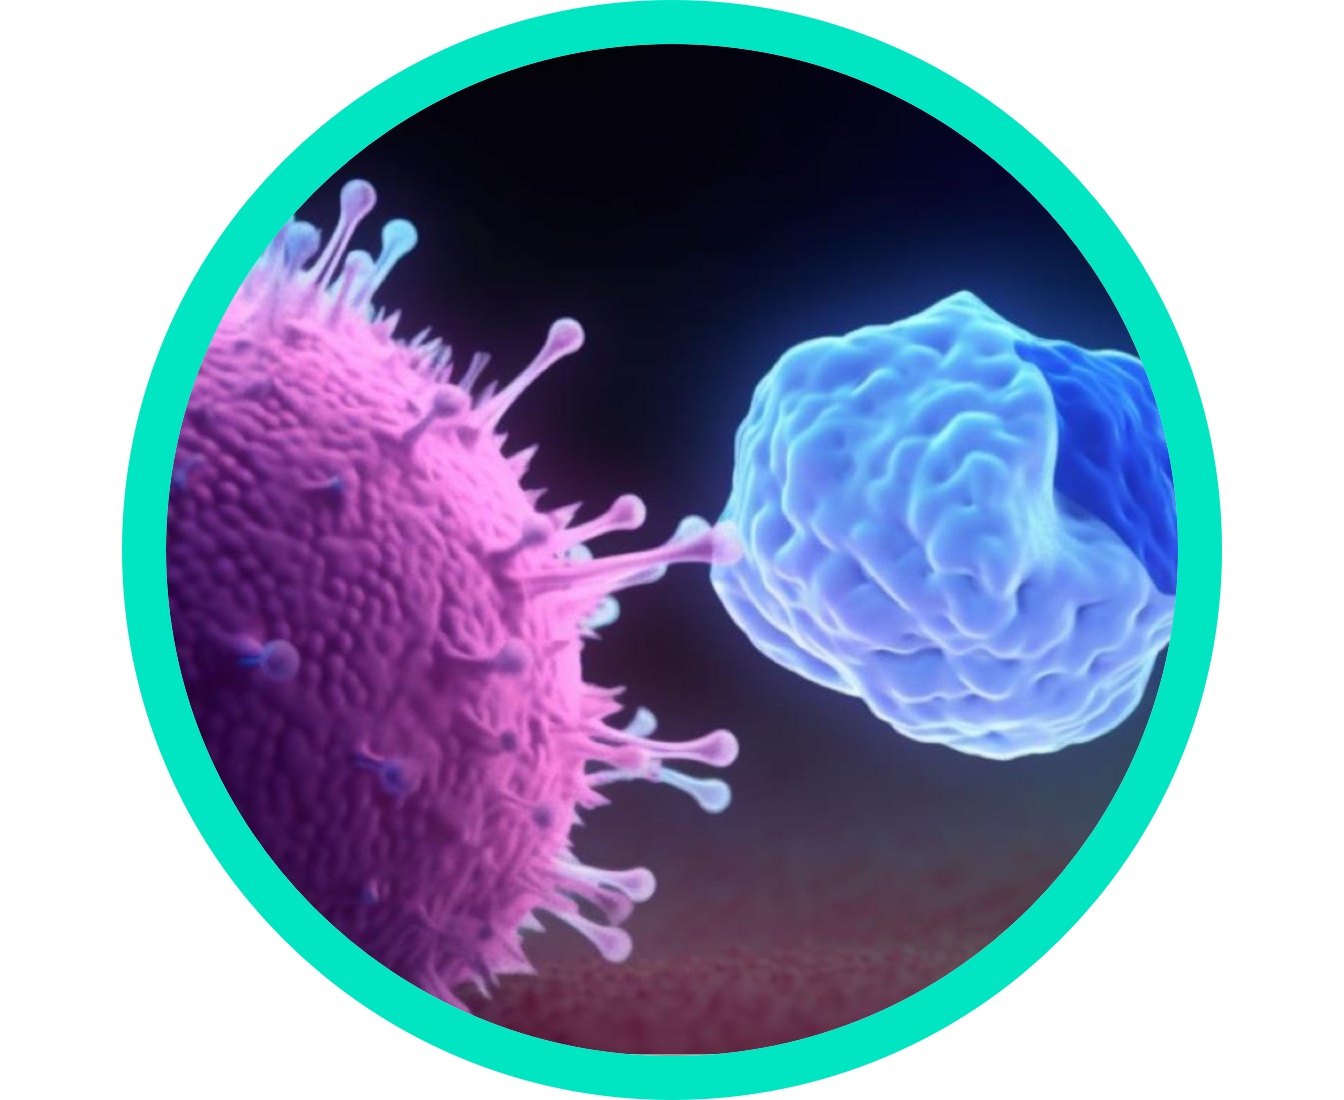 A pink dendritic cell communicating with a blue T-cell